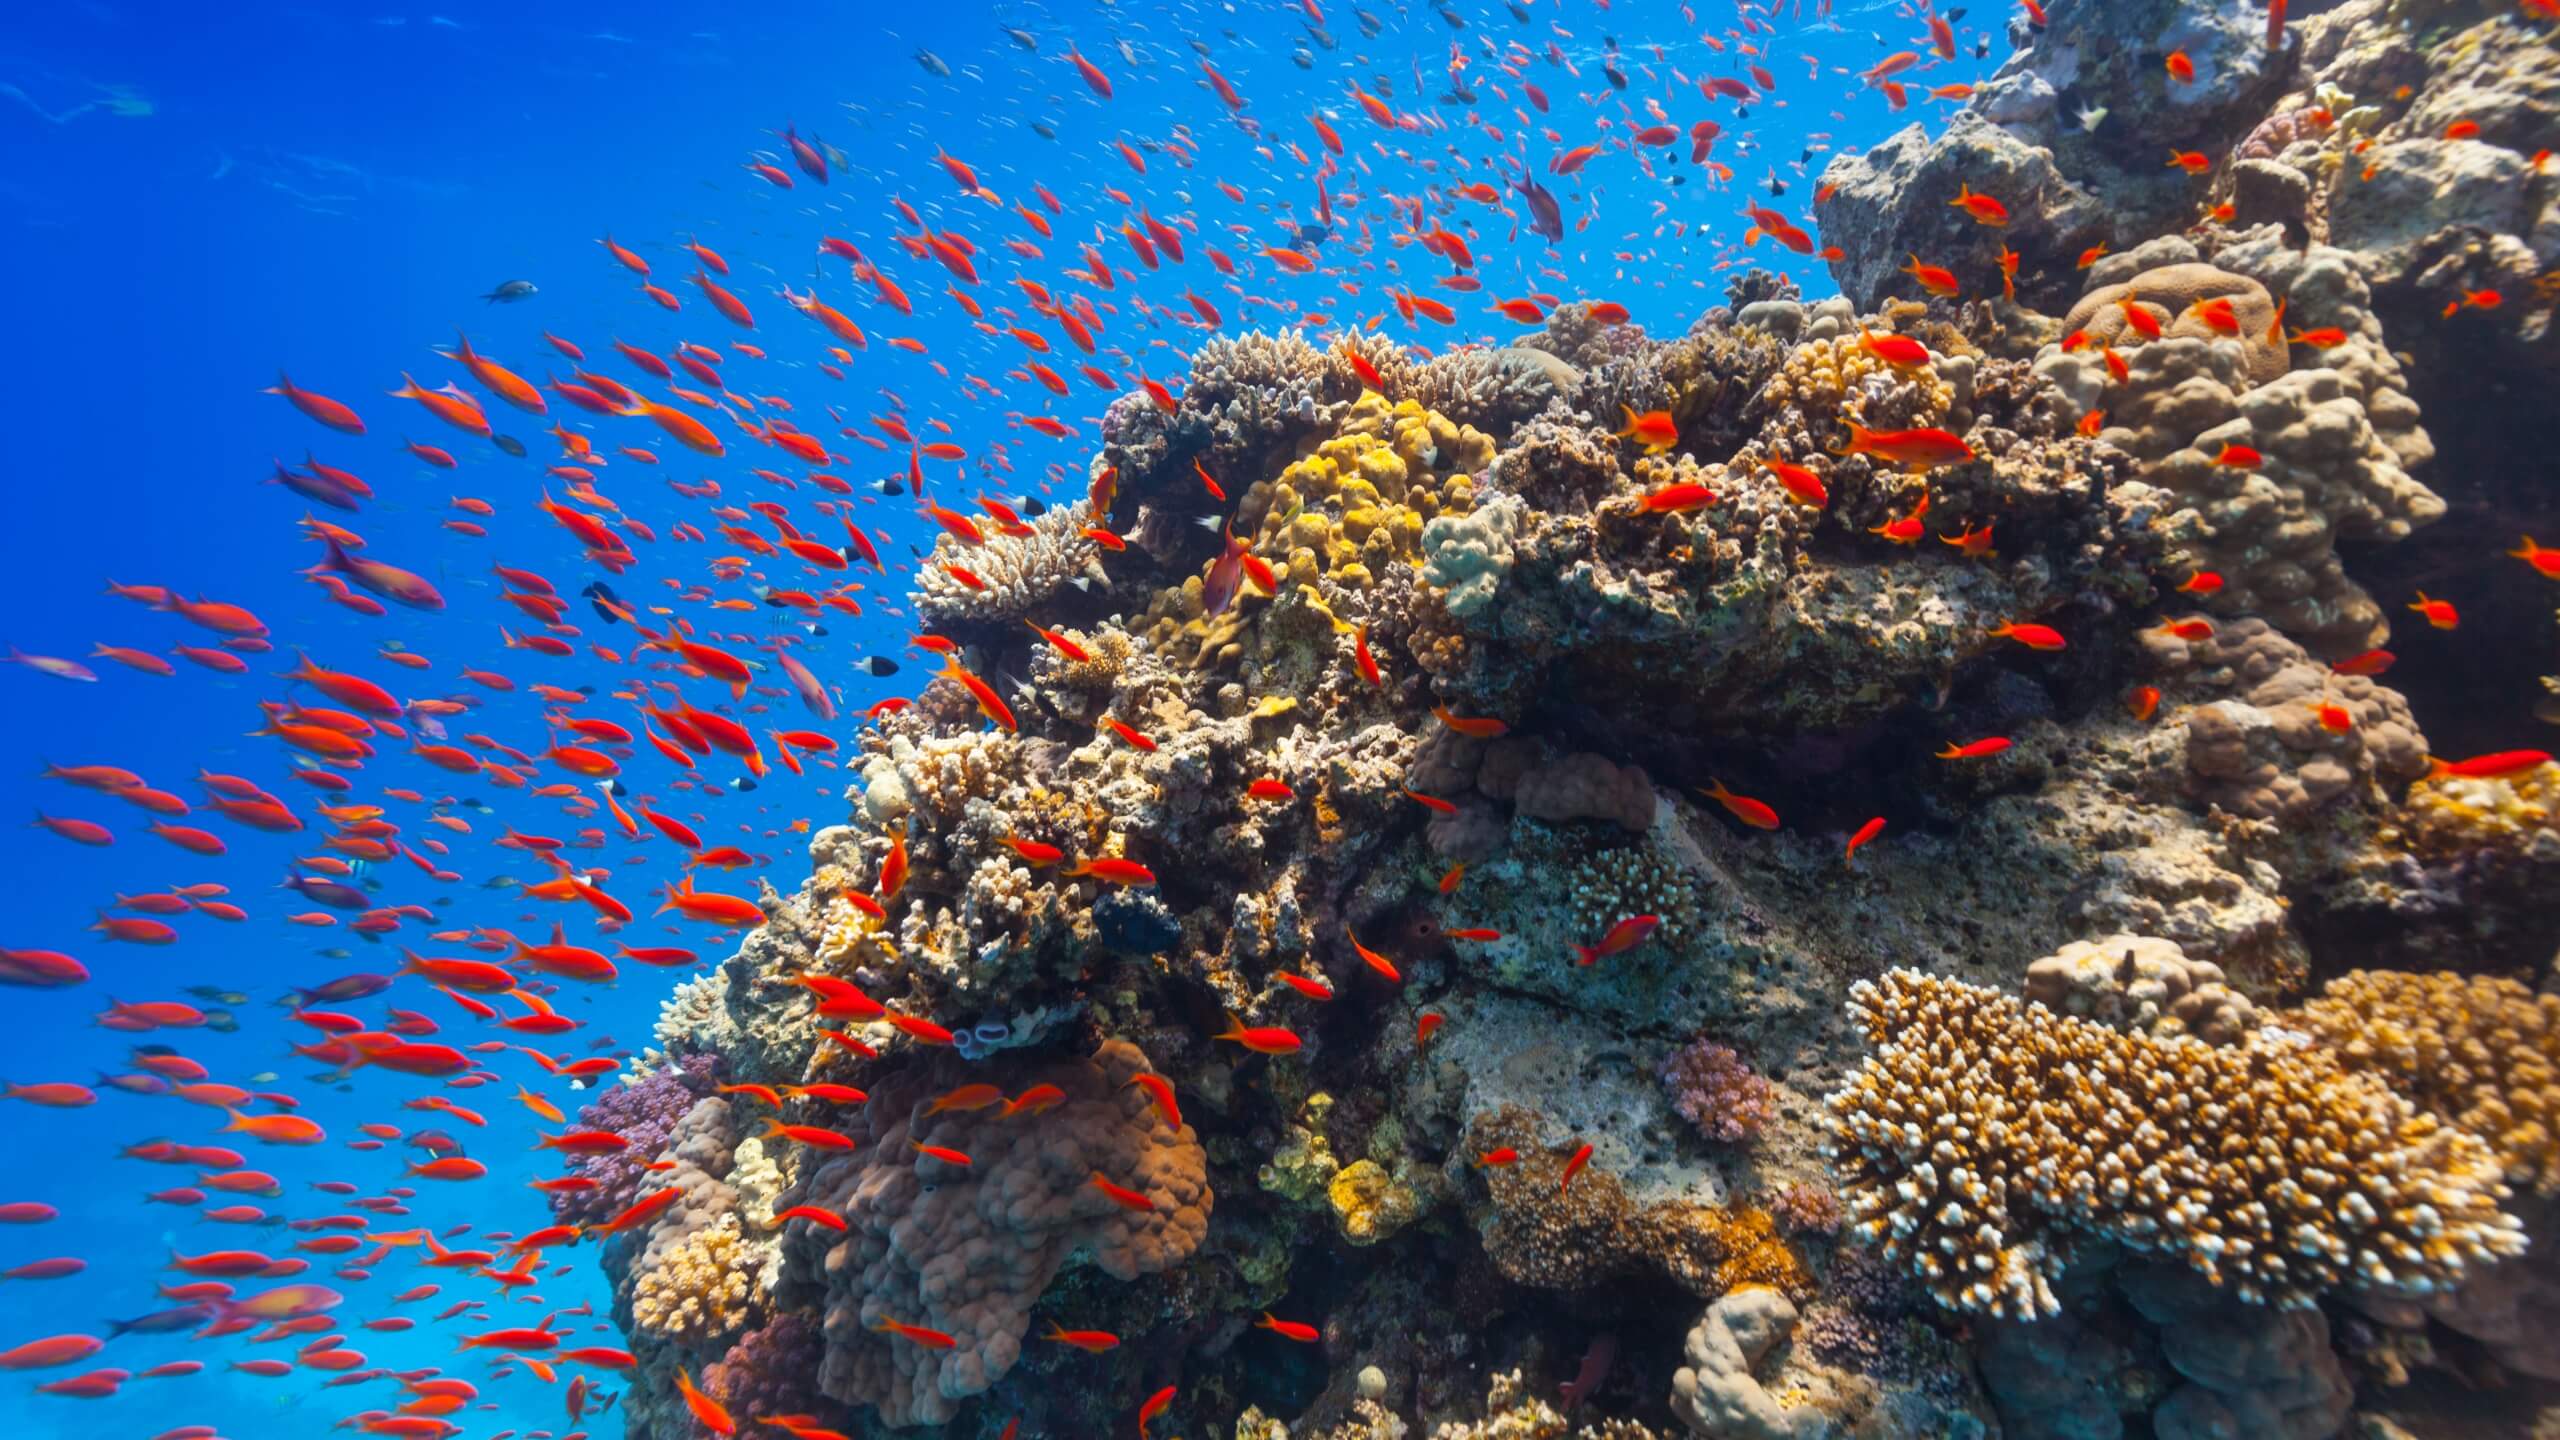 It has been estimated that coral reefs serve as living, feeding, spawning, and nursery ground for more than 1 million species of aquatic animals.